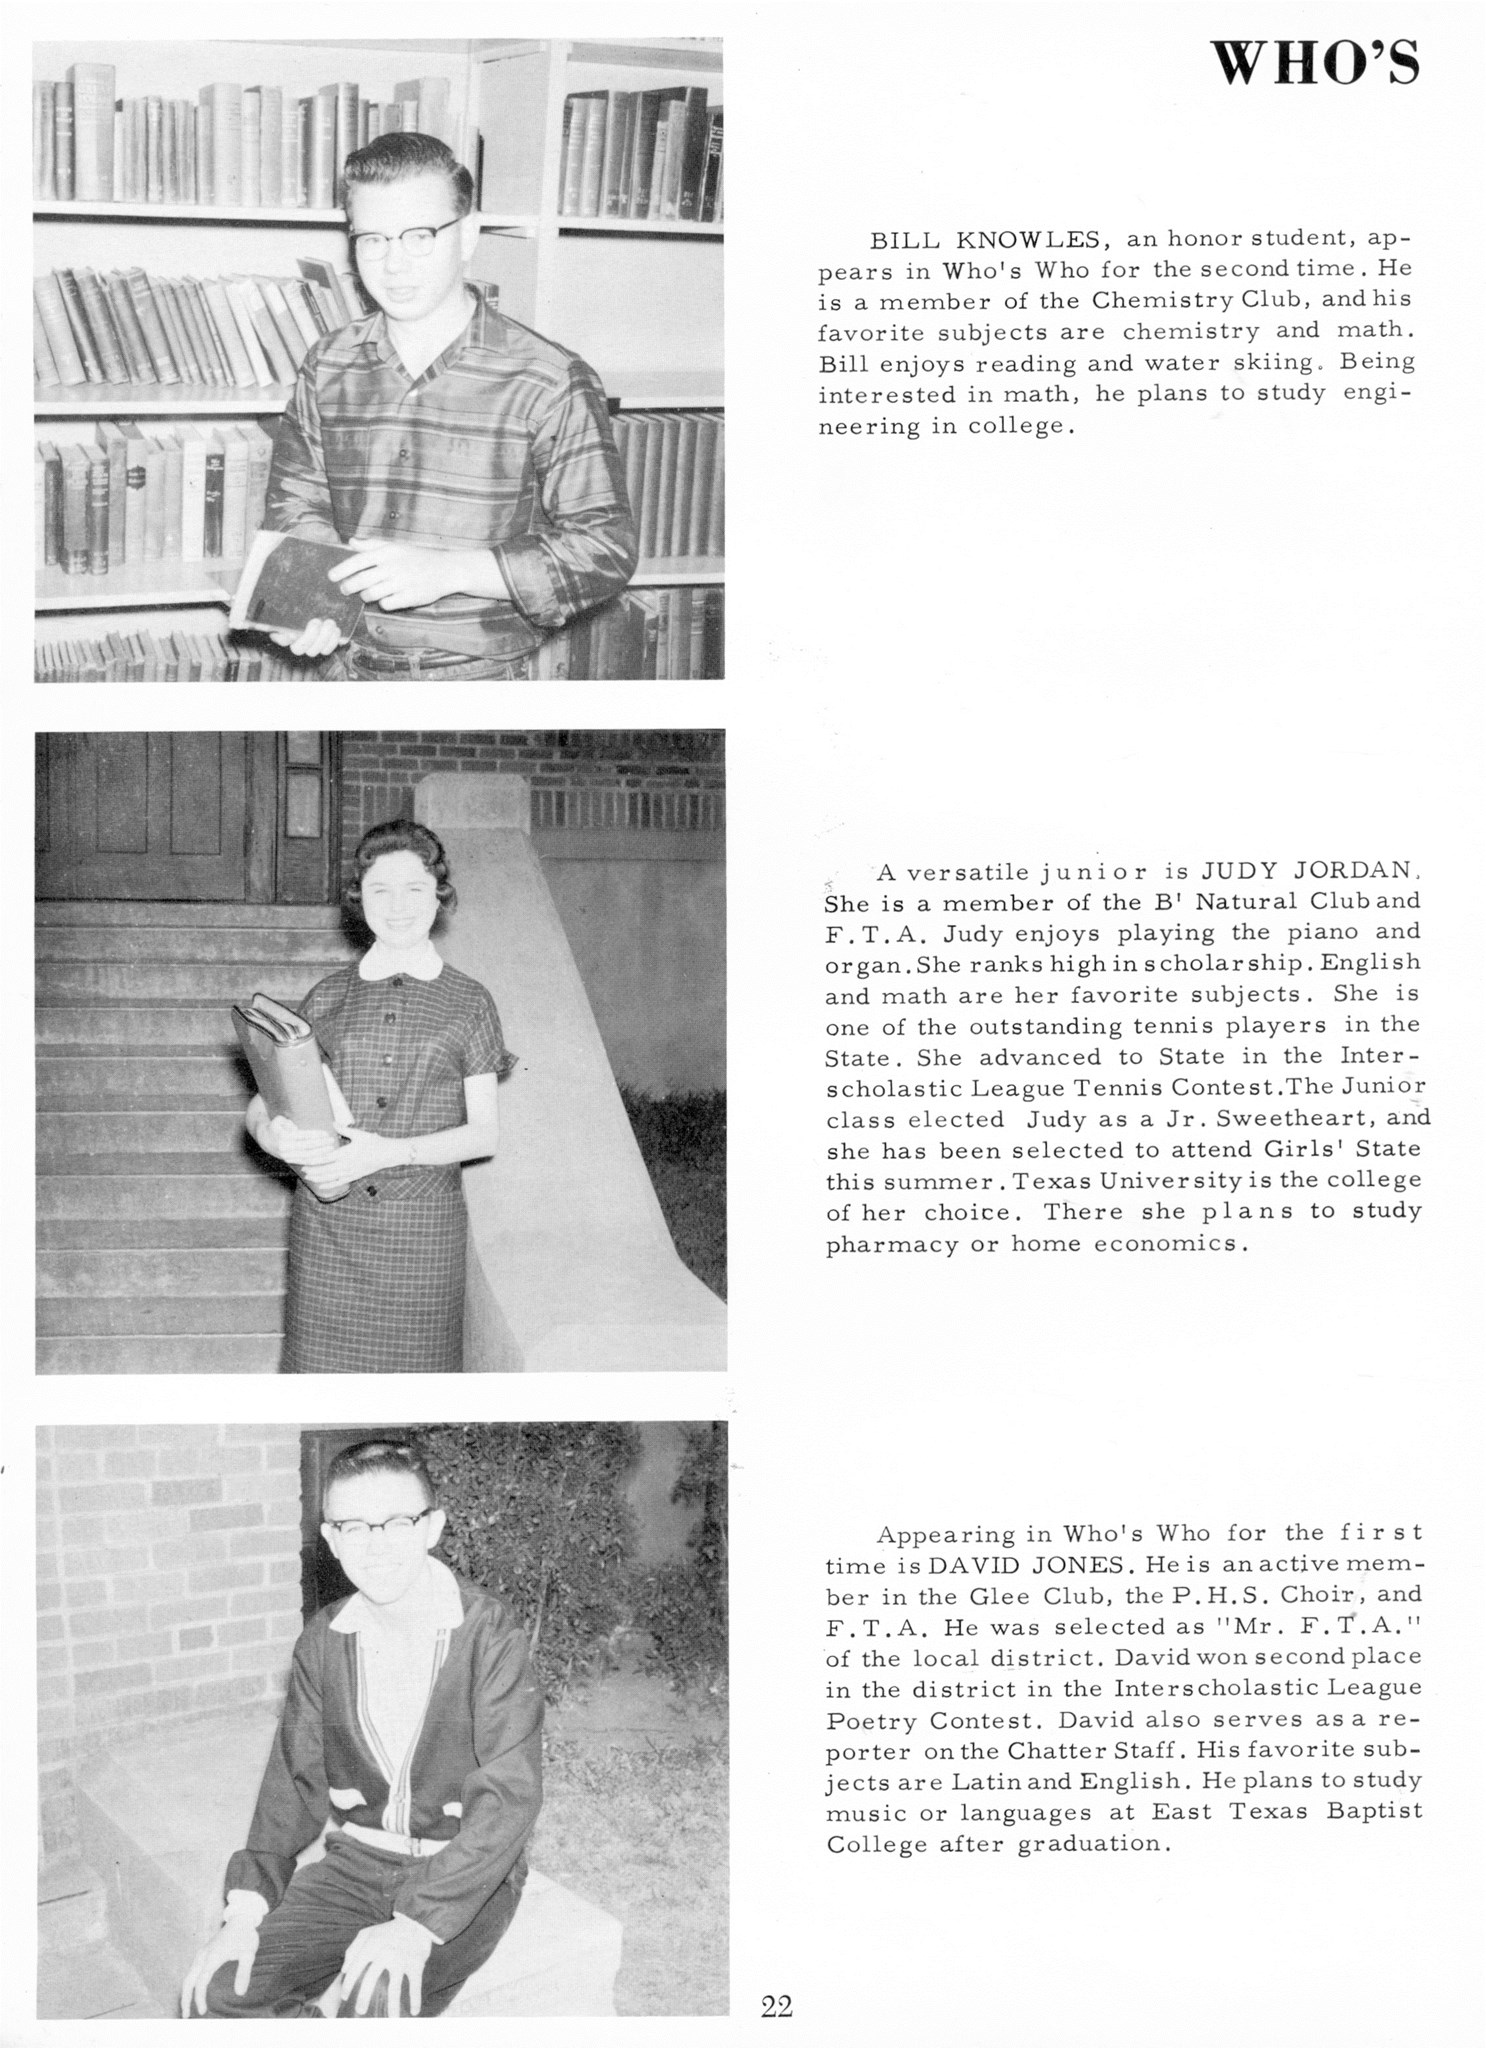 ../../../Images/Large/1959/Arclight-1959-pg0022.jpg